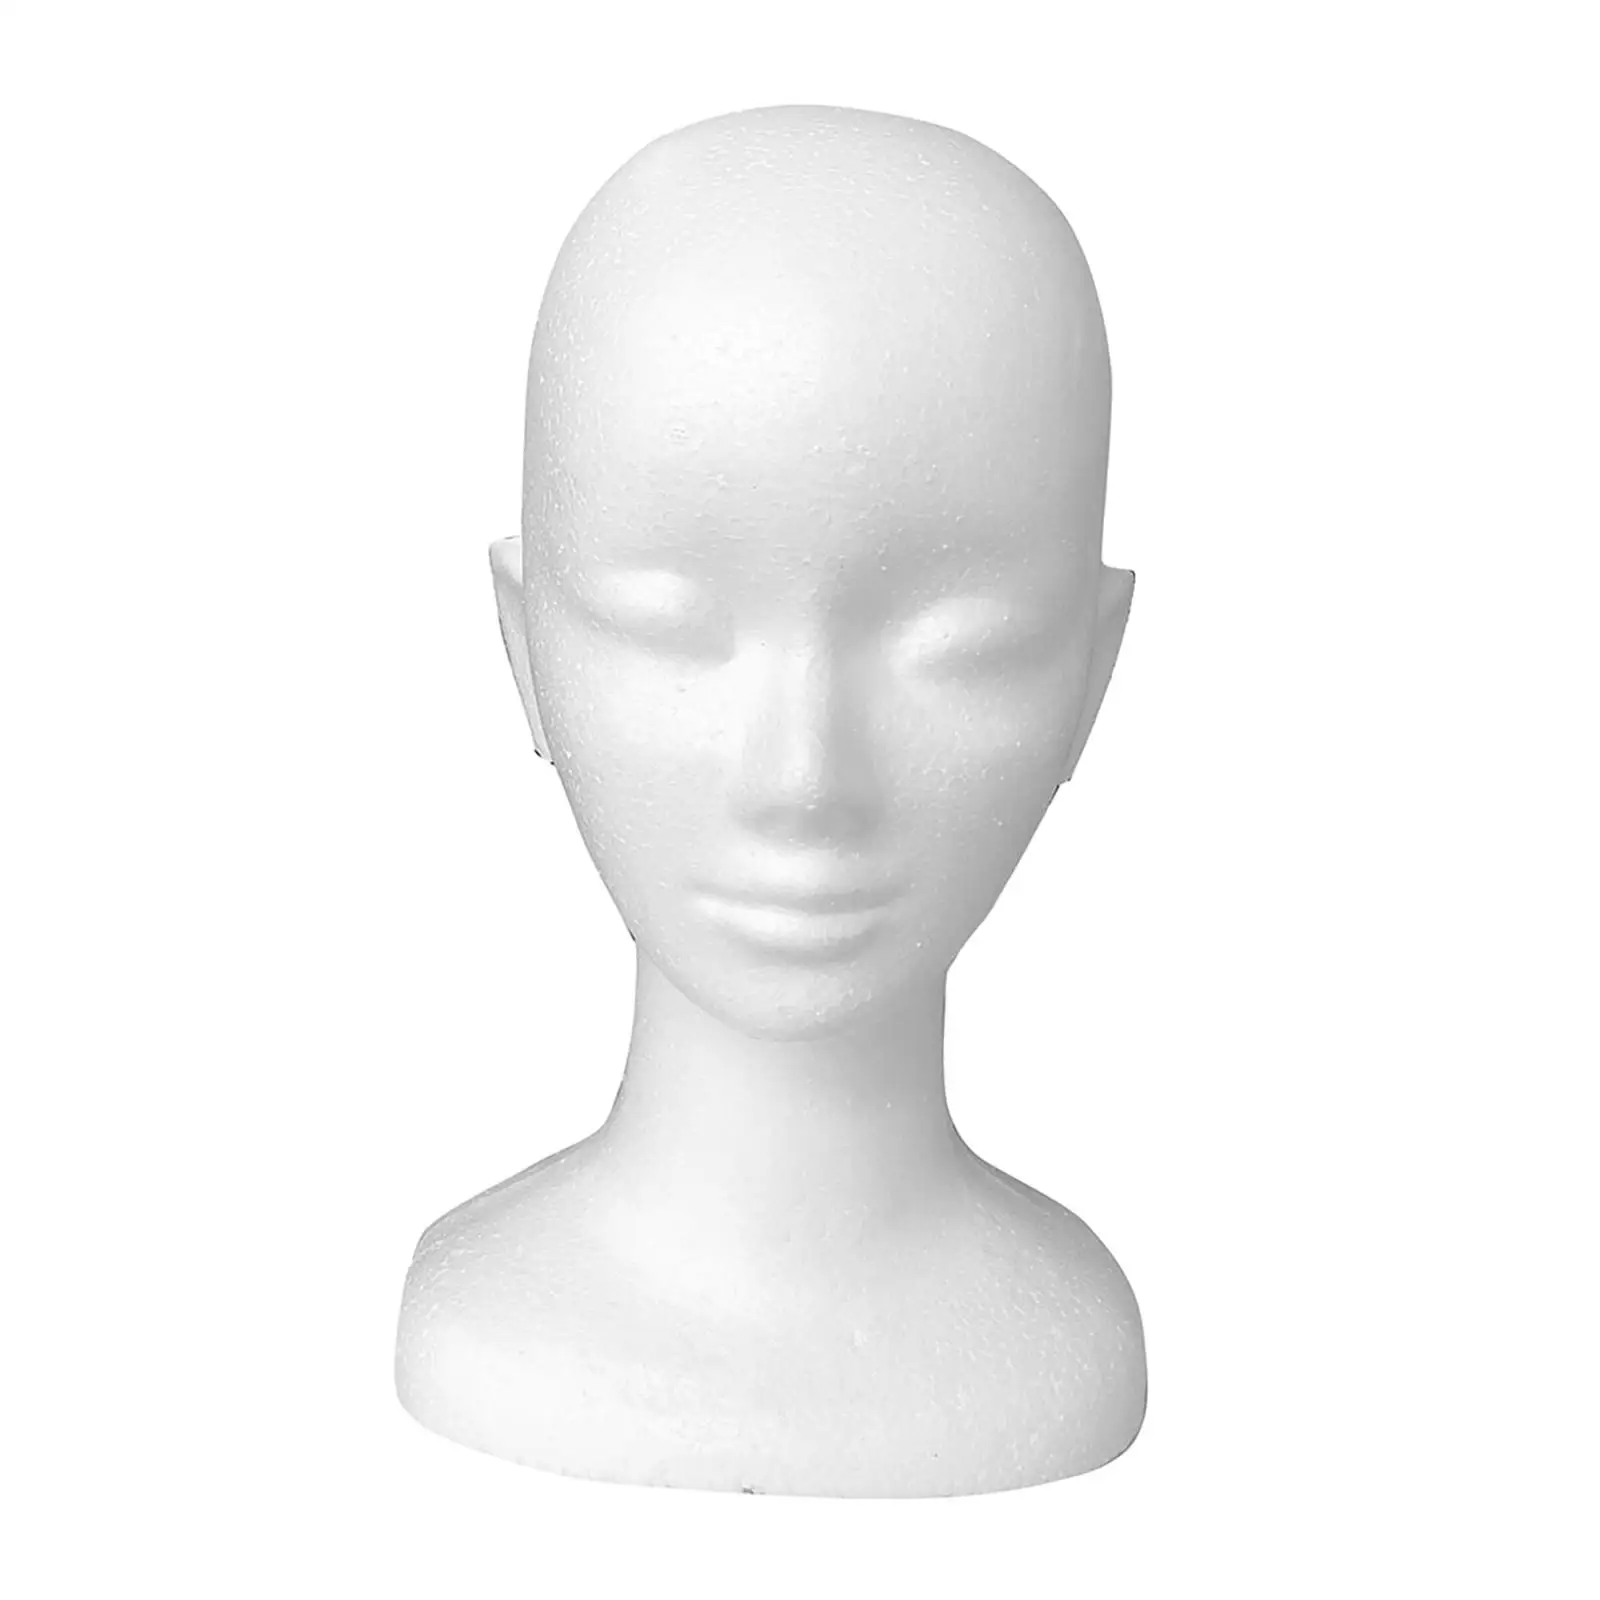 Mannequin Head Lightweight Manikin Head Display Wig Hair Glasses Hat Display for Jewelry Hats Headwear Hairpieces Sunglasses